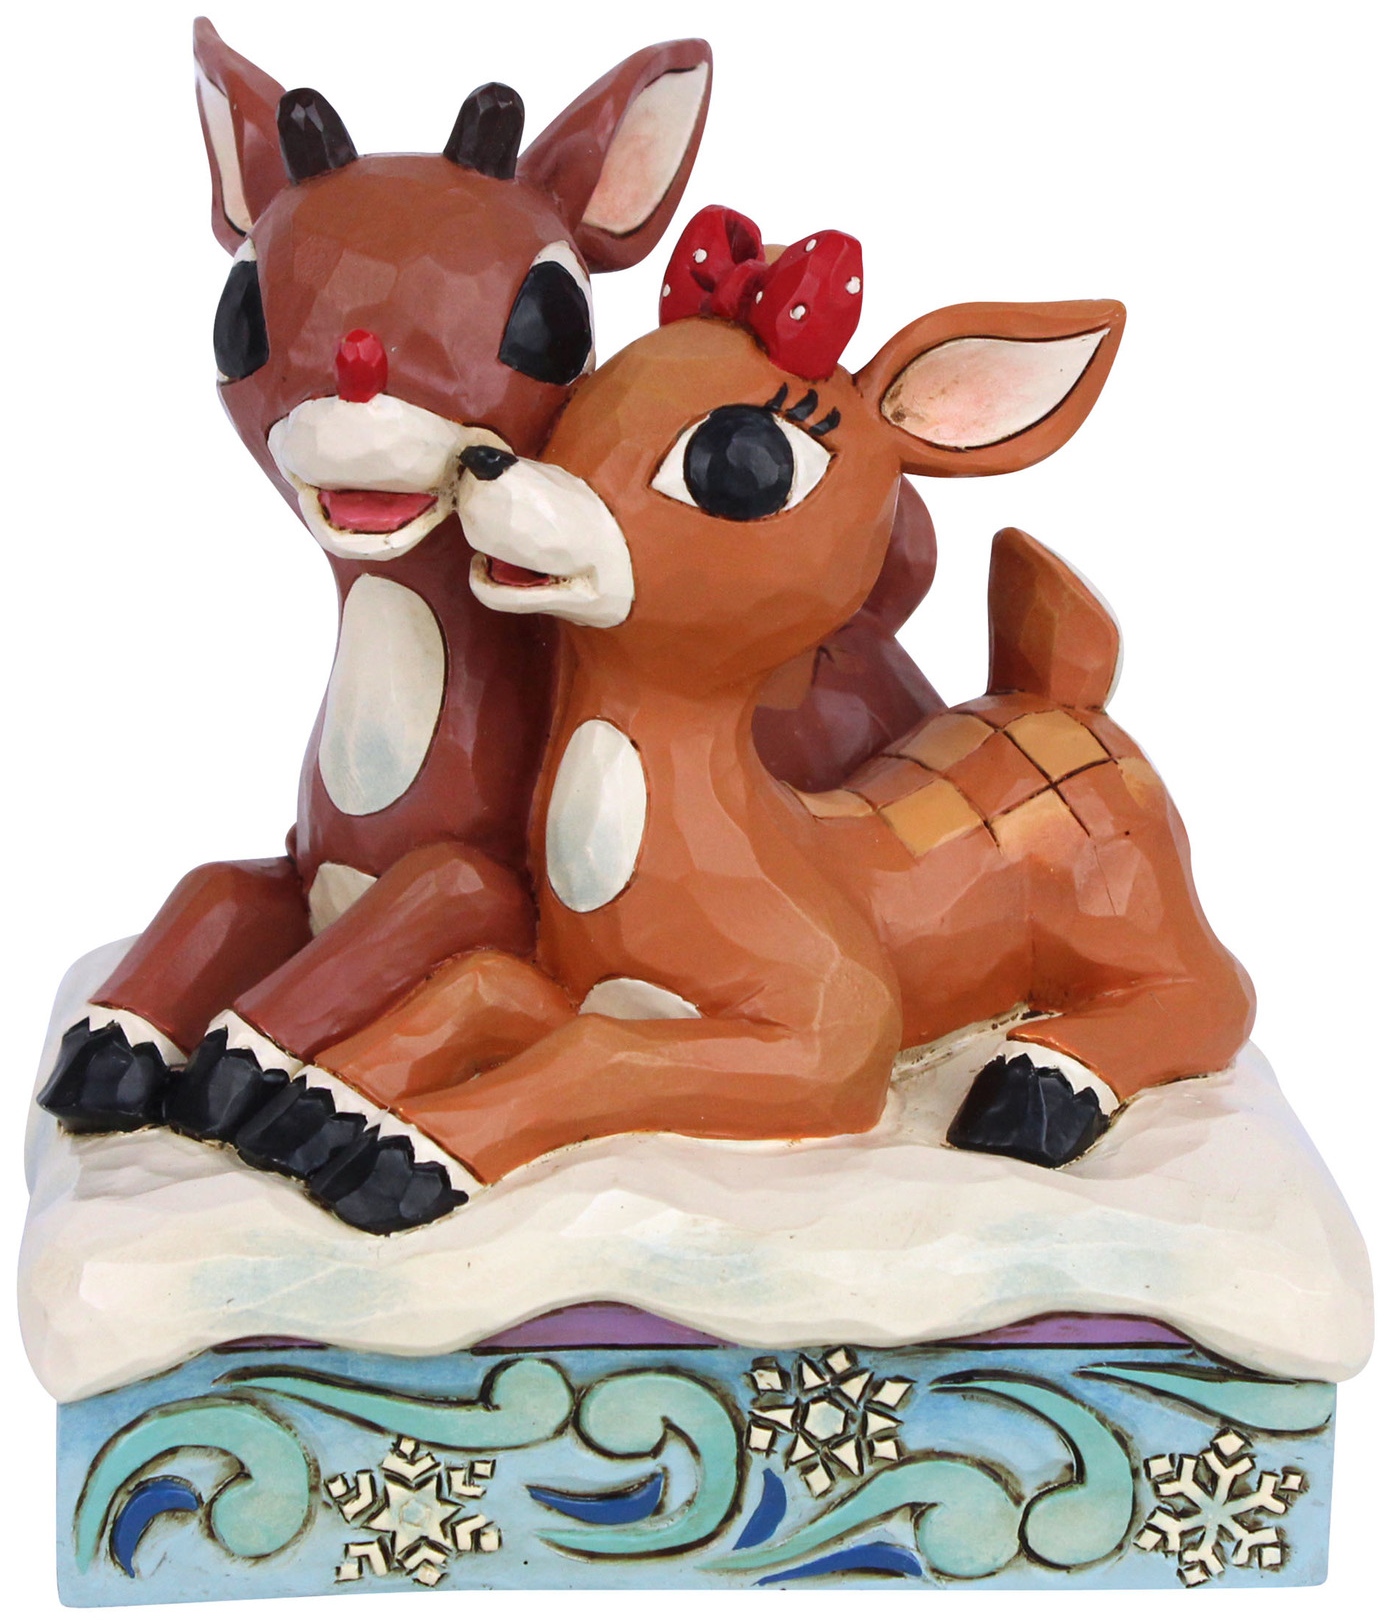 Jim Shore Rudolph Reindeer 6006790N Rudolph and Clarice Figurine